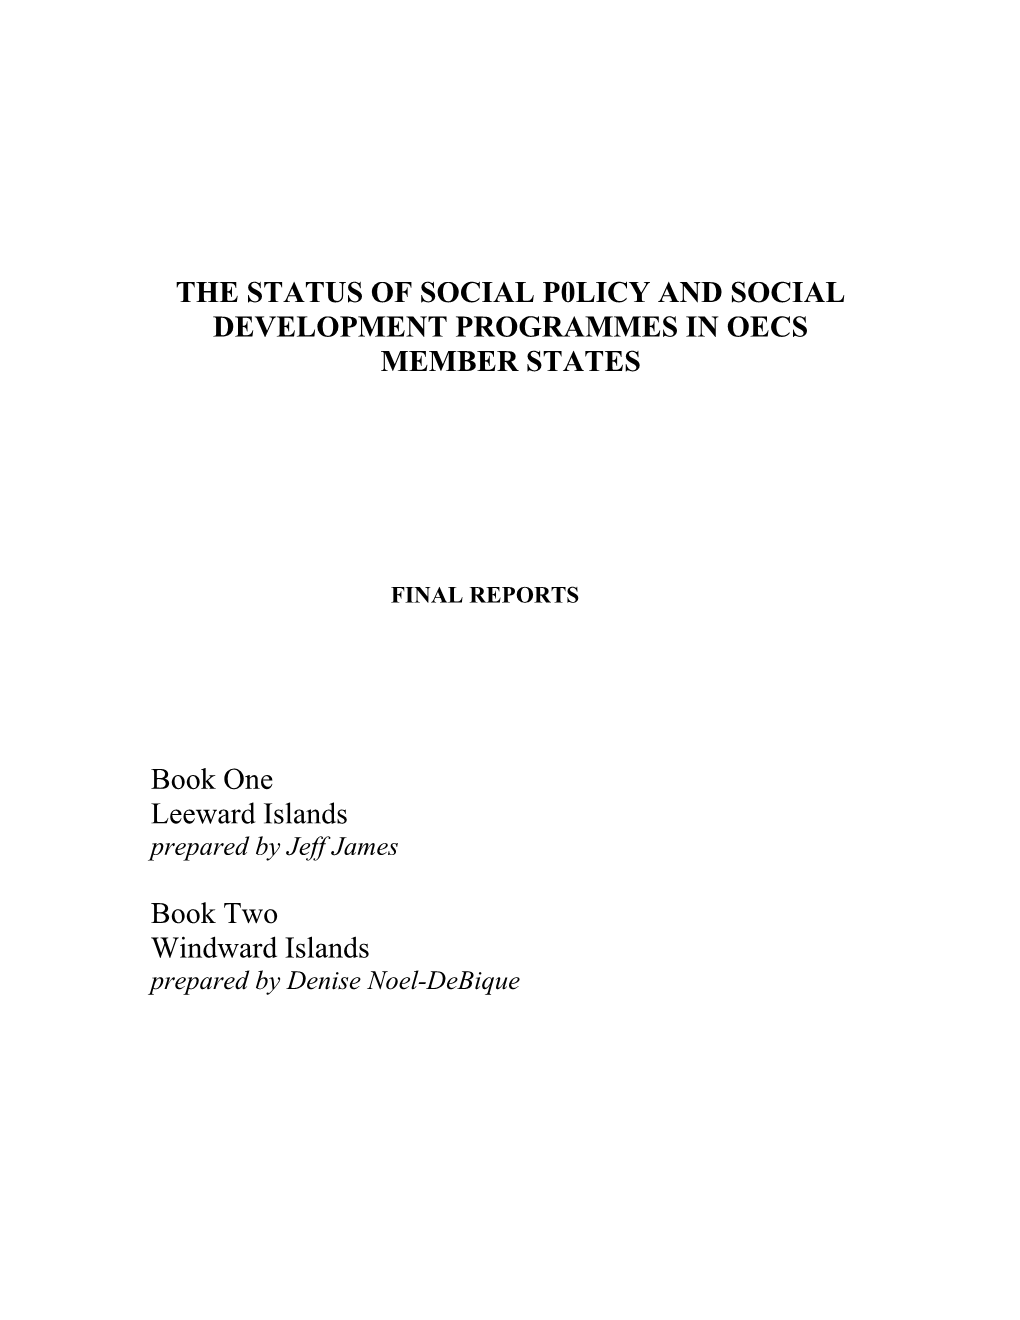 The Status of Social P0licy Andsocialdevelopment Programmes in Oecs Member States